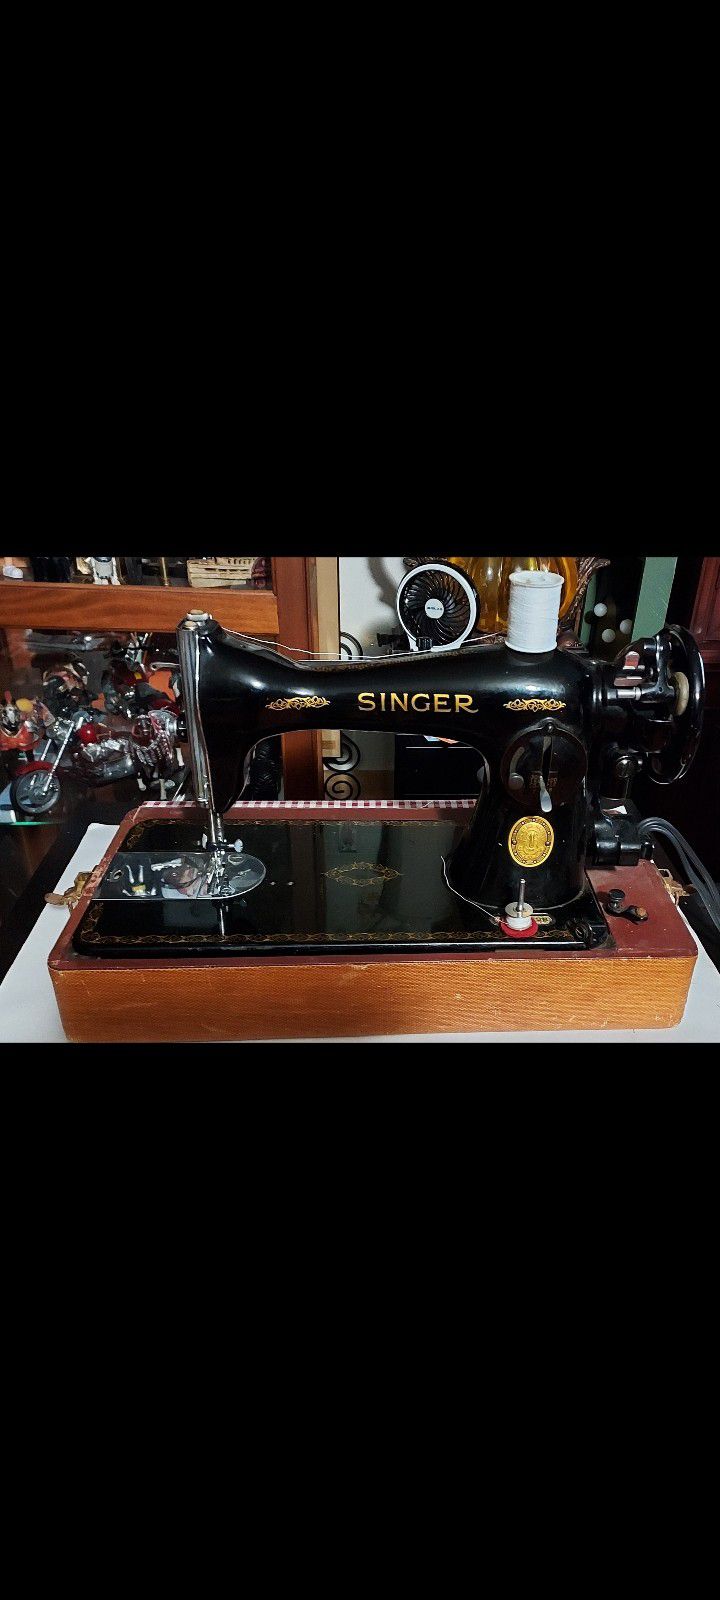 Like New Antique Singer Sewing Machine In Excellent Condition,  $200.00